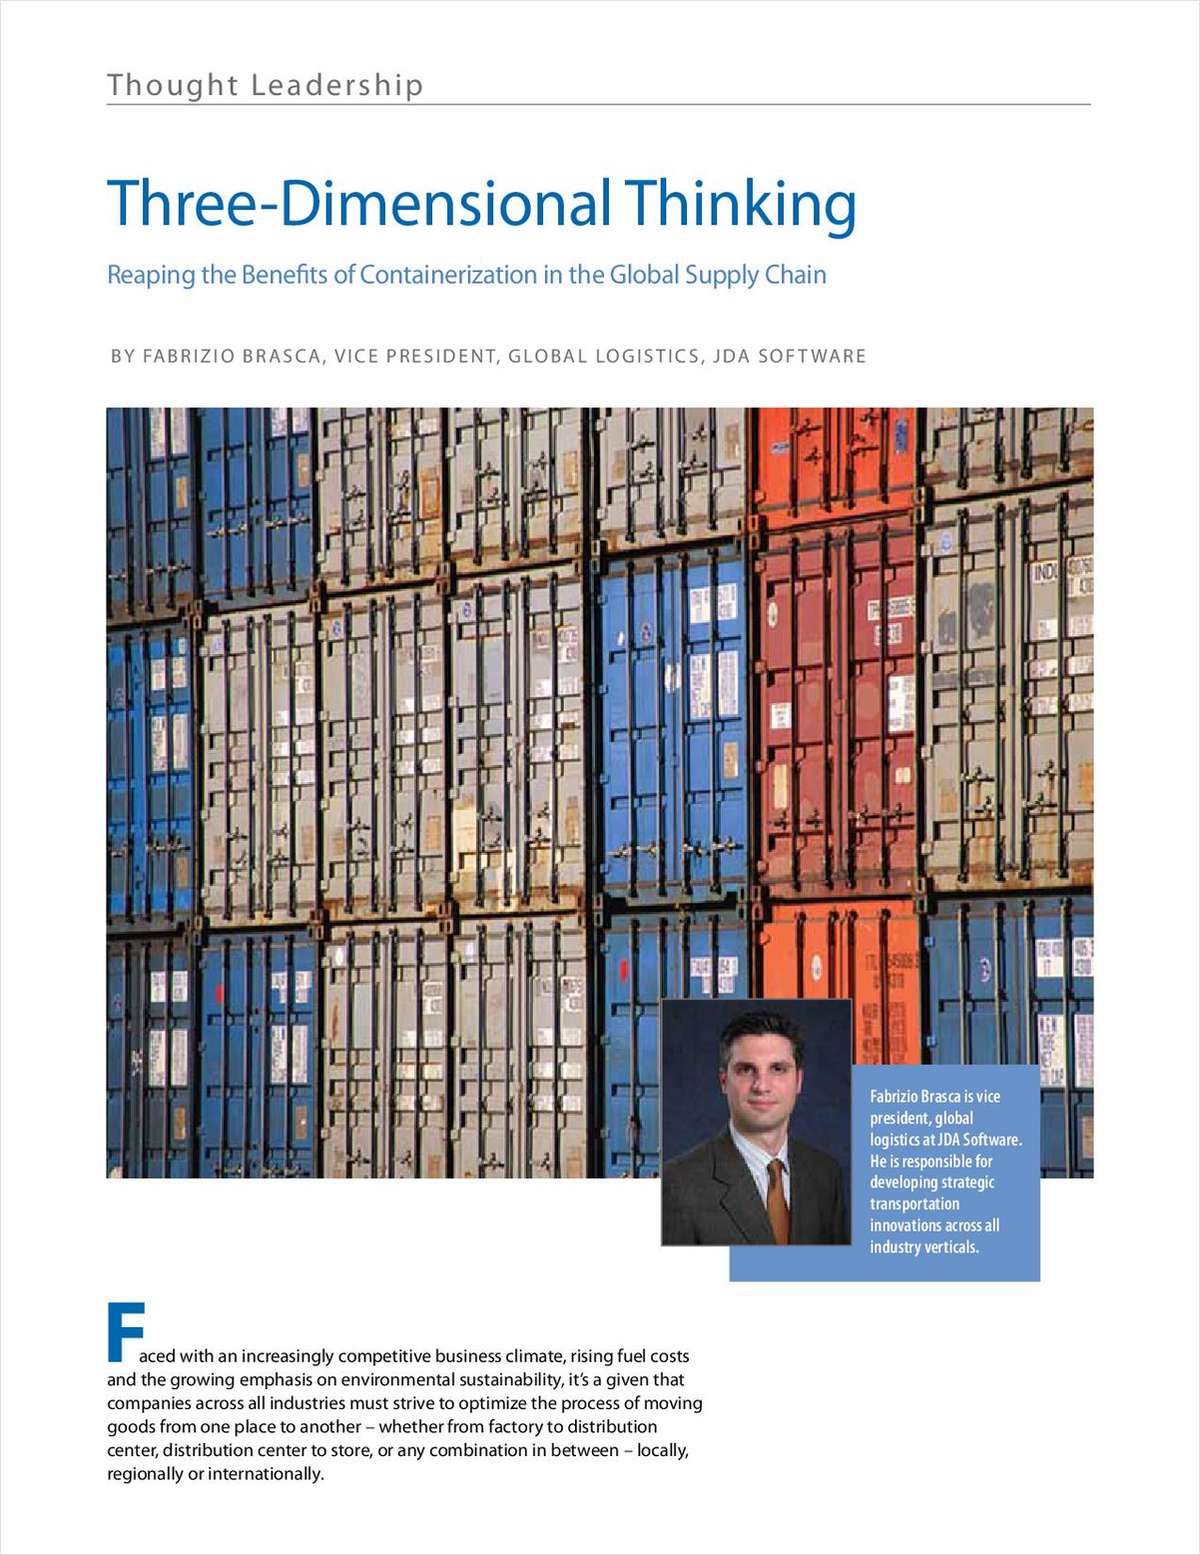 Three-Dimensional Thinking: Reaping the Benefits of Containerization in the Global Supply Chain